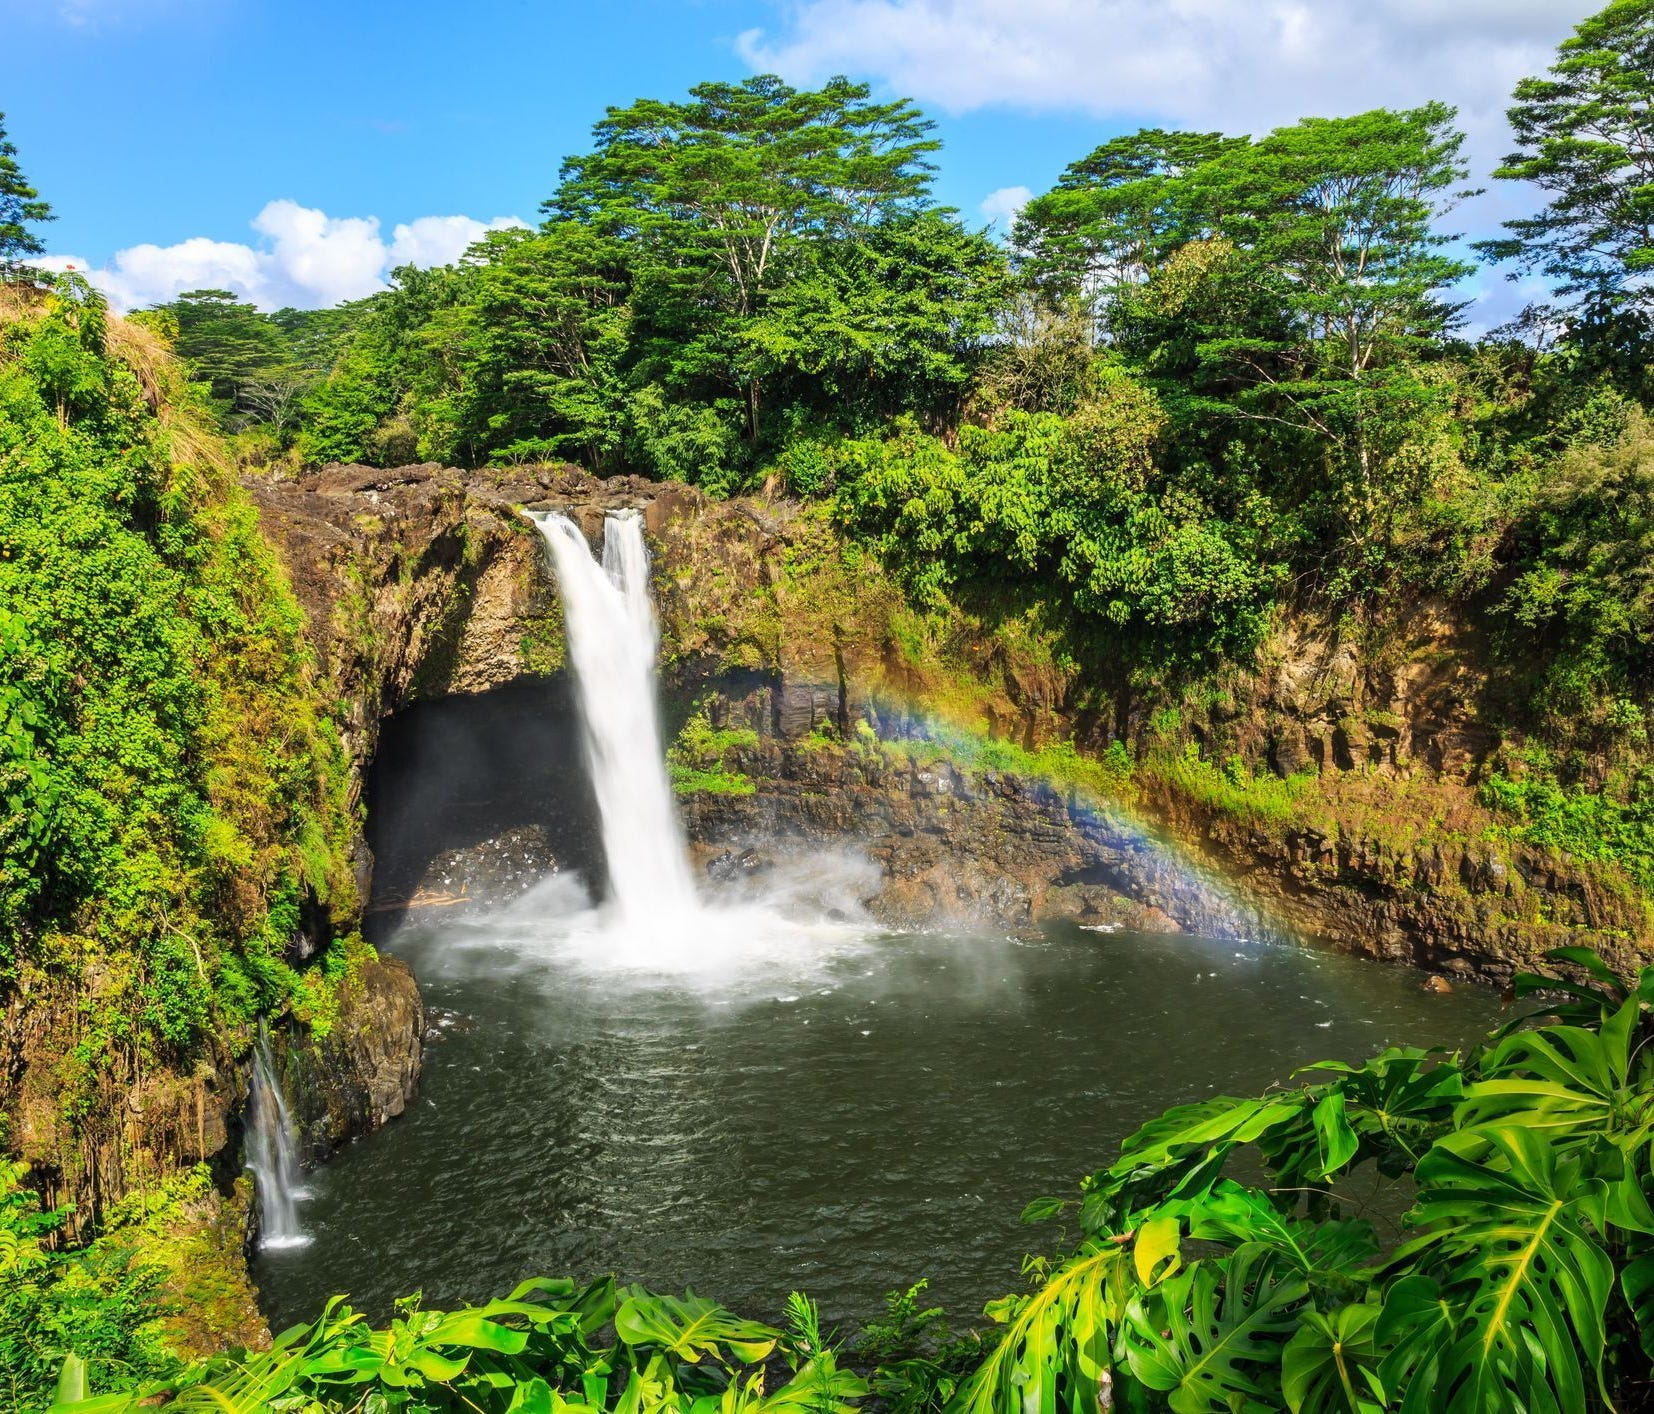 Hilo, Hawaii: Hilo earns a spot as one of the best affordable summer destinations this year. Hilo's lush, tropical surroundings offer a striking counterpoint to the otherworldly lava fields on display elsewhere on the Big Island, and visitors enjoy a